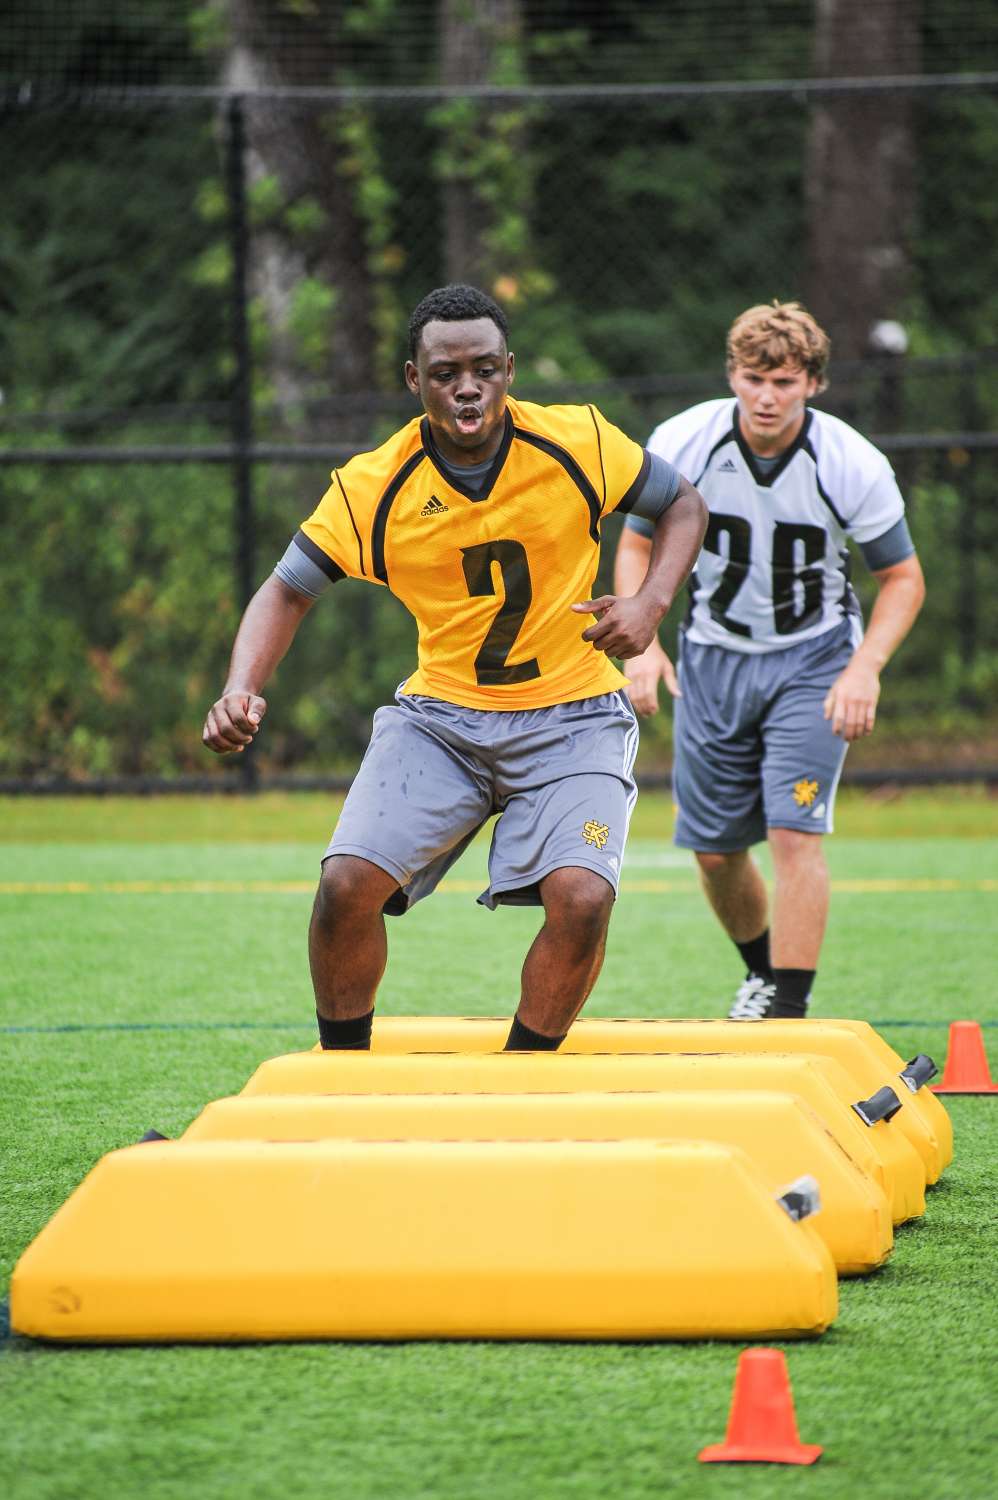 Inaugural Workout Gives Freshman Taste of College Football